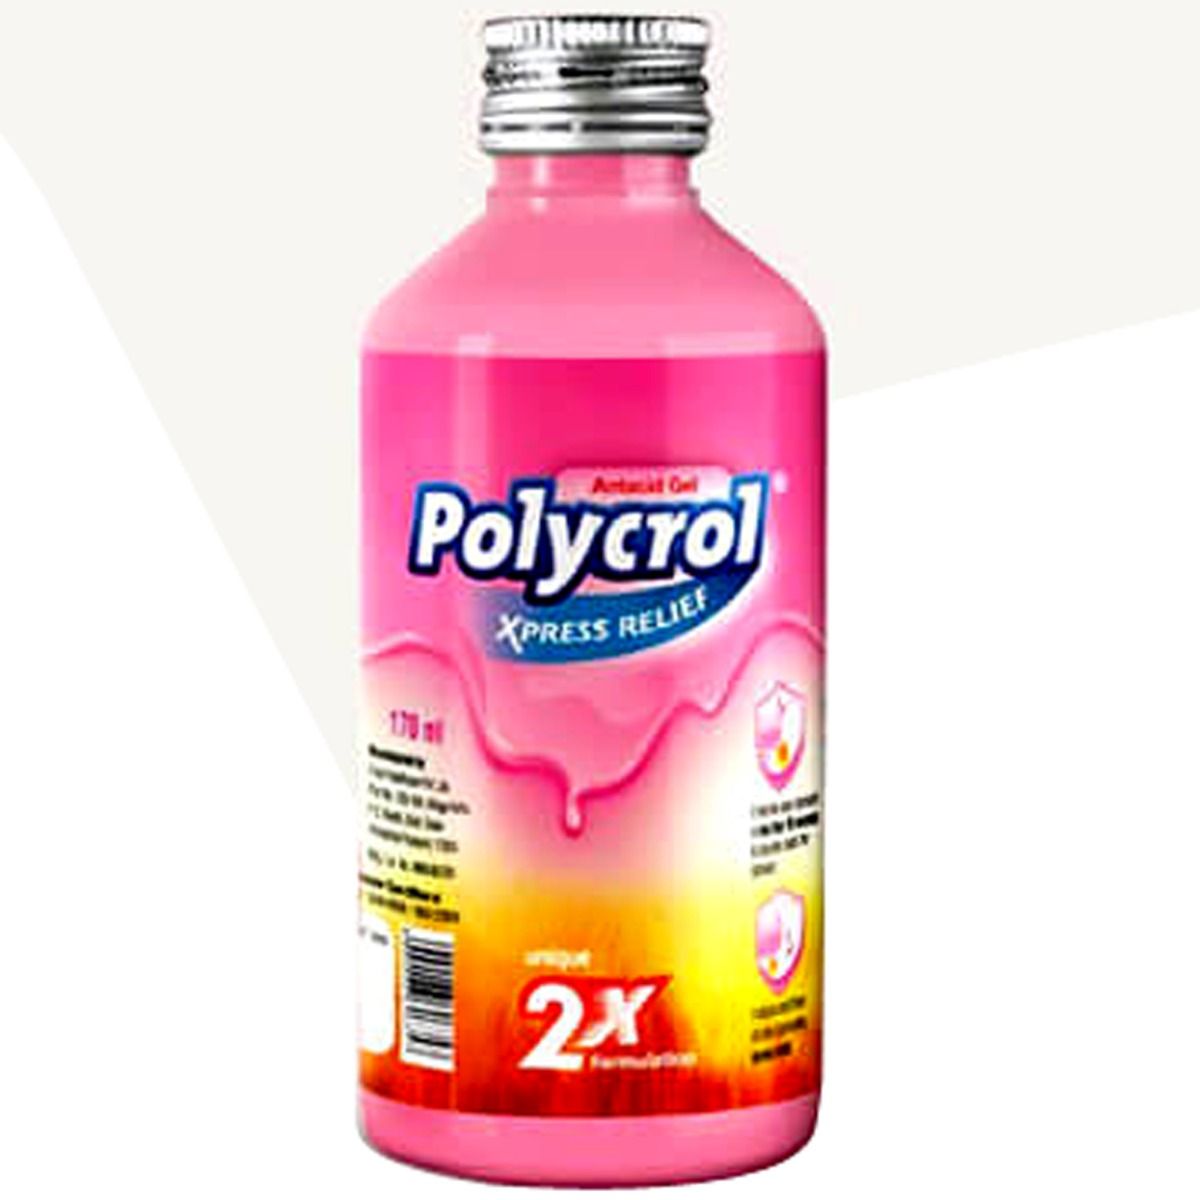 Polycrol Xpress Relief  Syrup, 450 ml, Pack of 1 